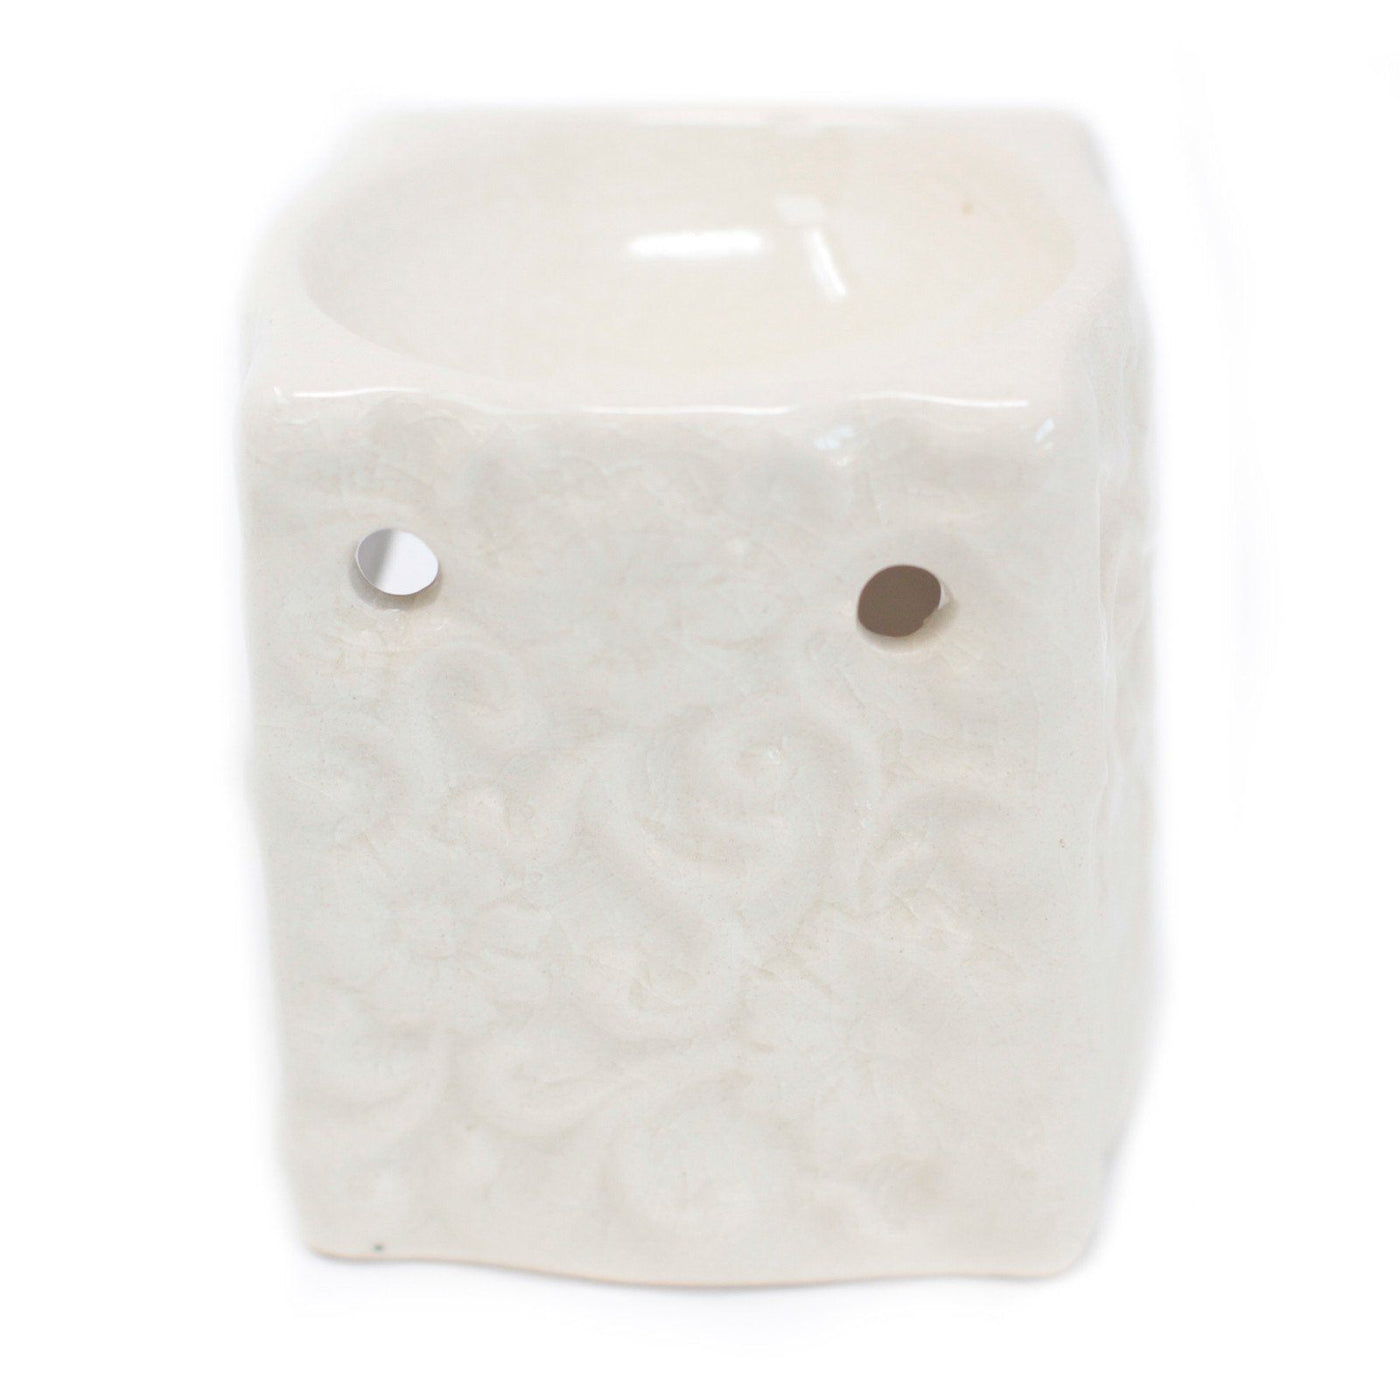 Classic Small Square Floral Oil Burner - Assorted: White Turquoise Apple Green  